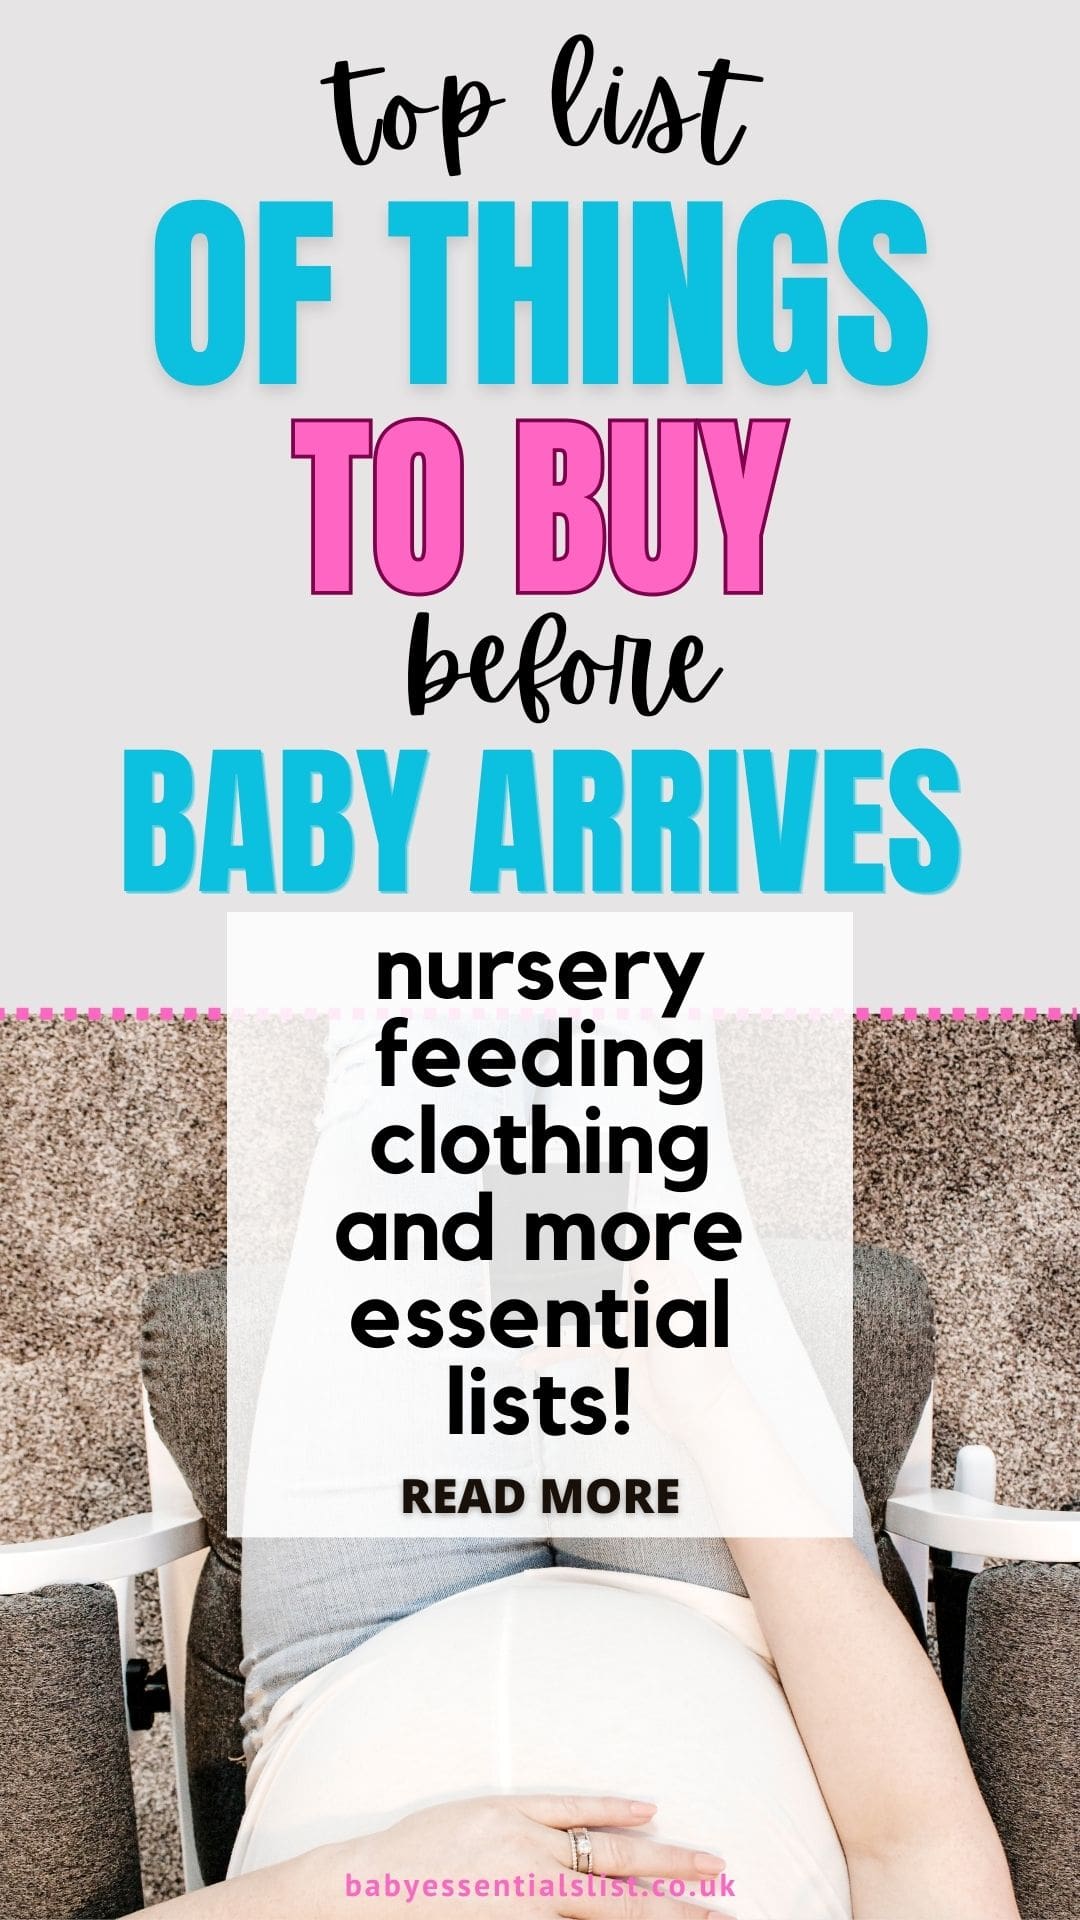 Top list of things to buy before baby arrives. Nursery, feeding, clothing and more essential lists.